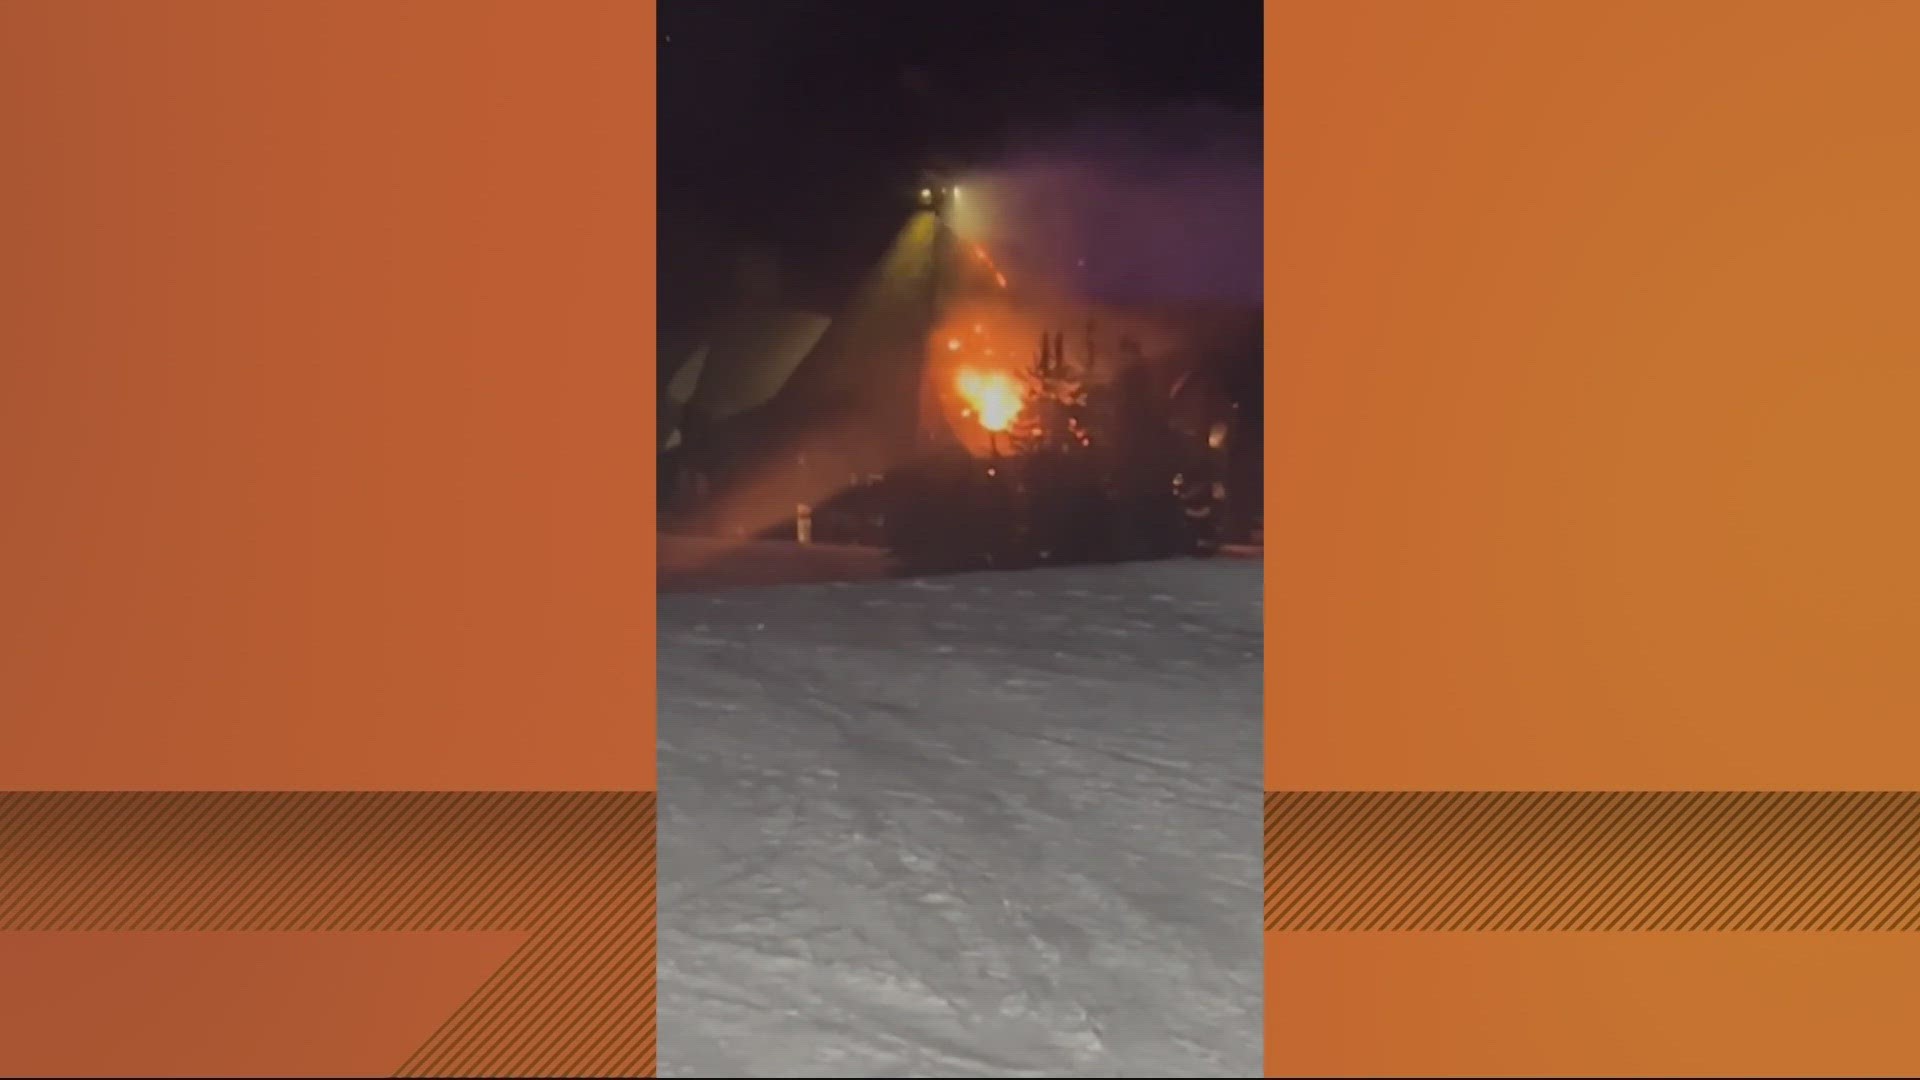 Timberline said there is no internal smoke or fire damage. The lodge is closed until further notice and the ski resort will be closed at least for a day.